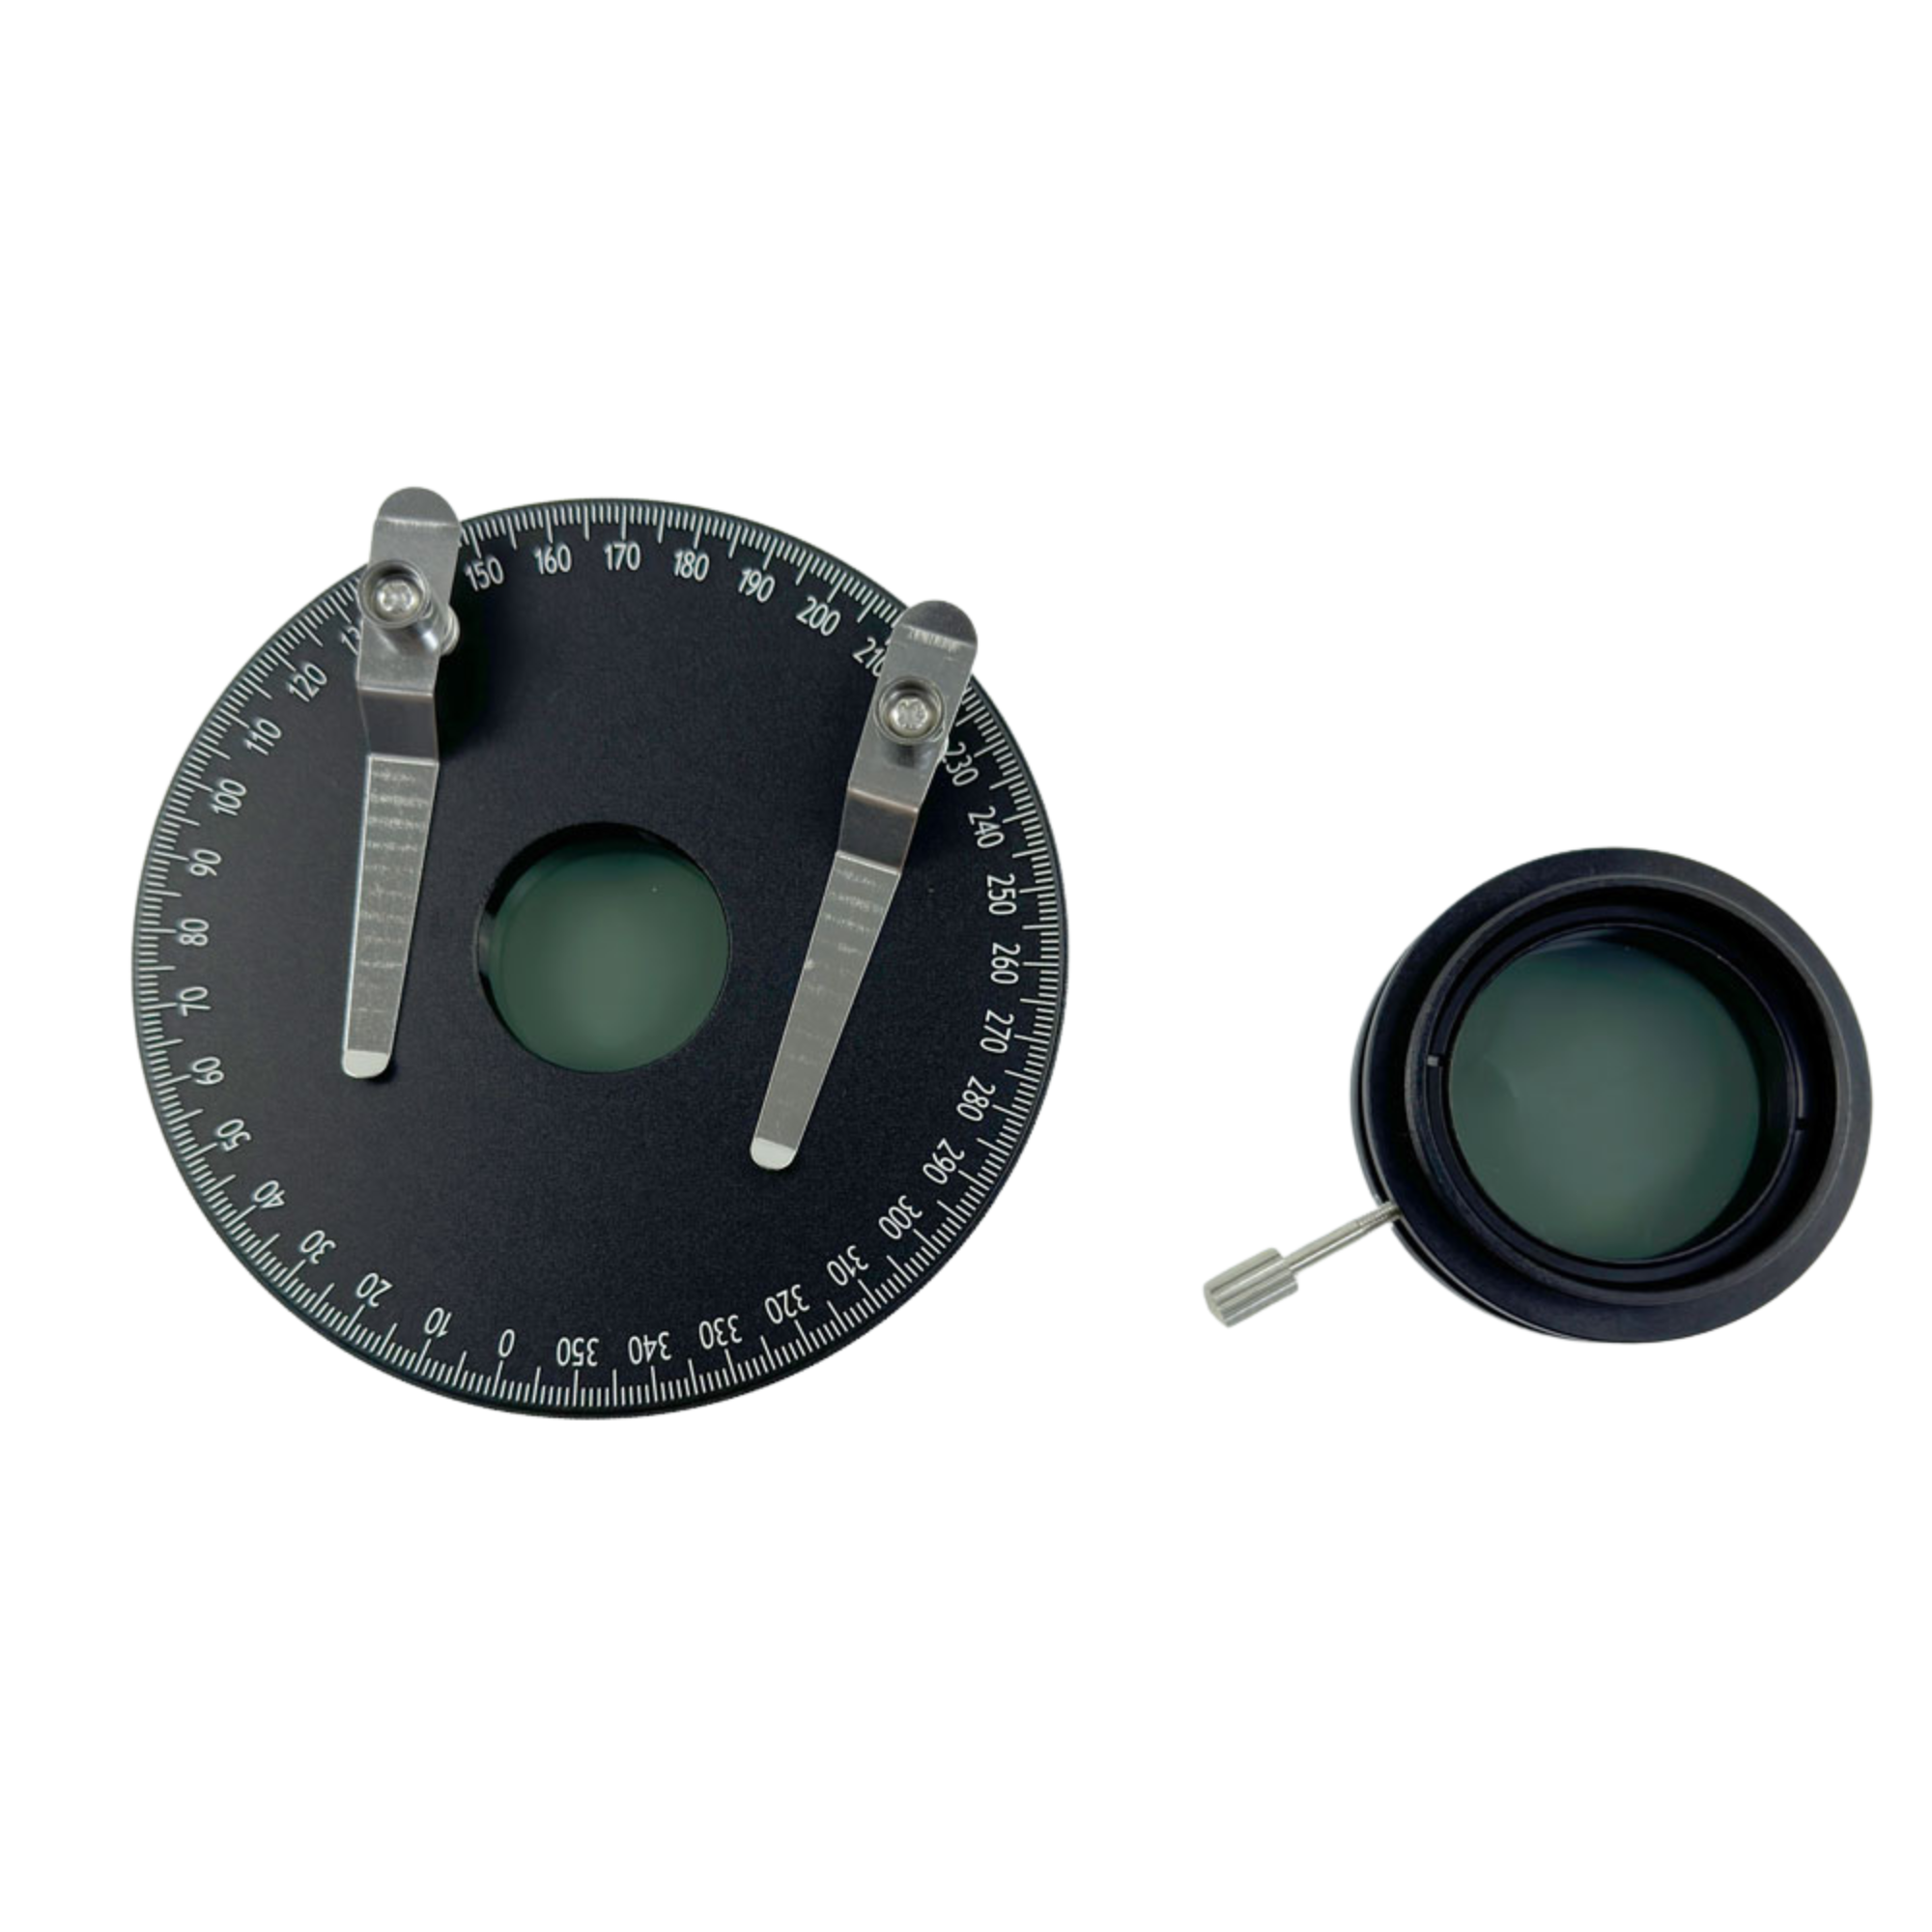 Set of polarization filters for stereo microscopes